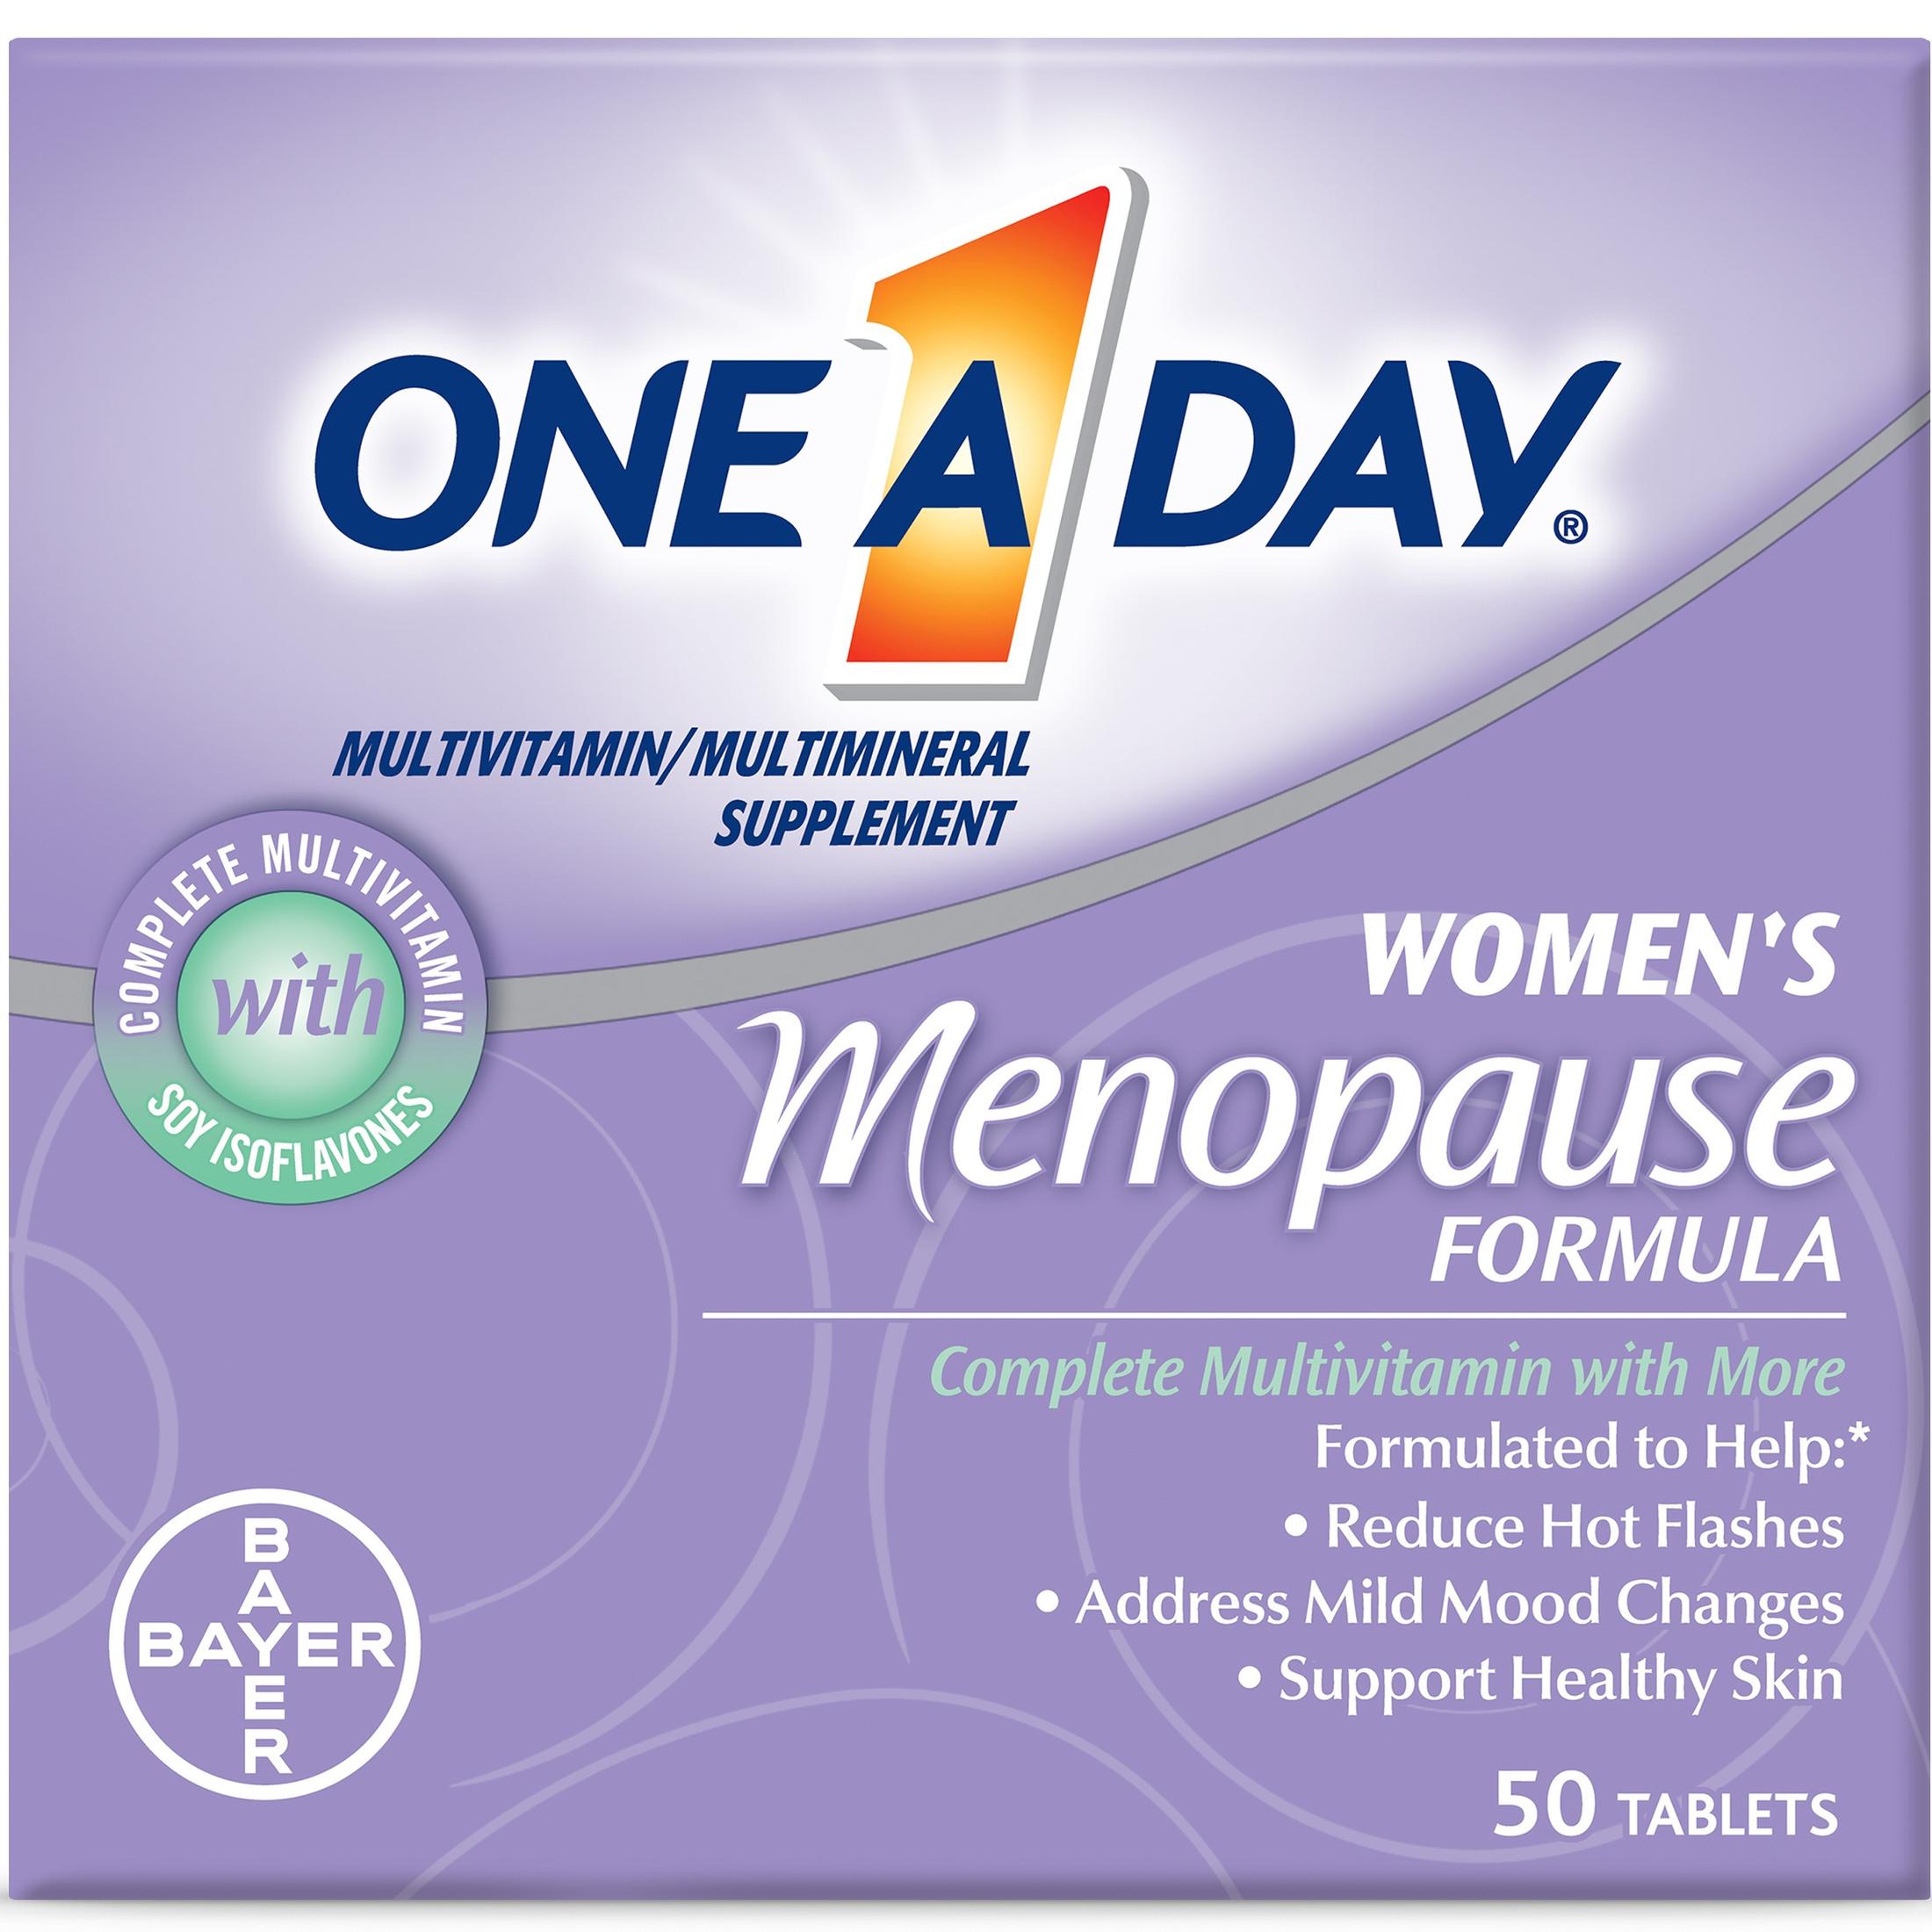 One A Day Women's Menopause Formula Multivitamin Tablets, 50 Count - image 5 of 10